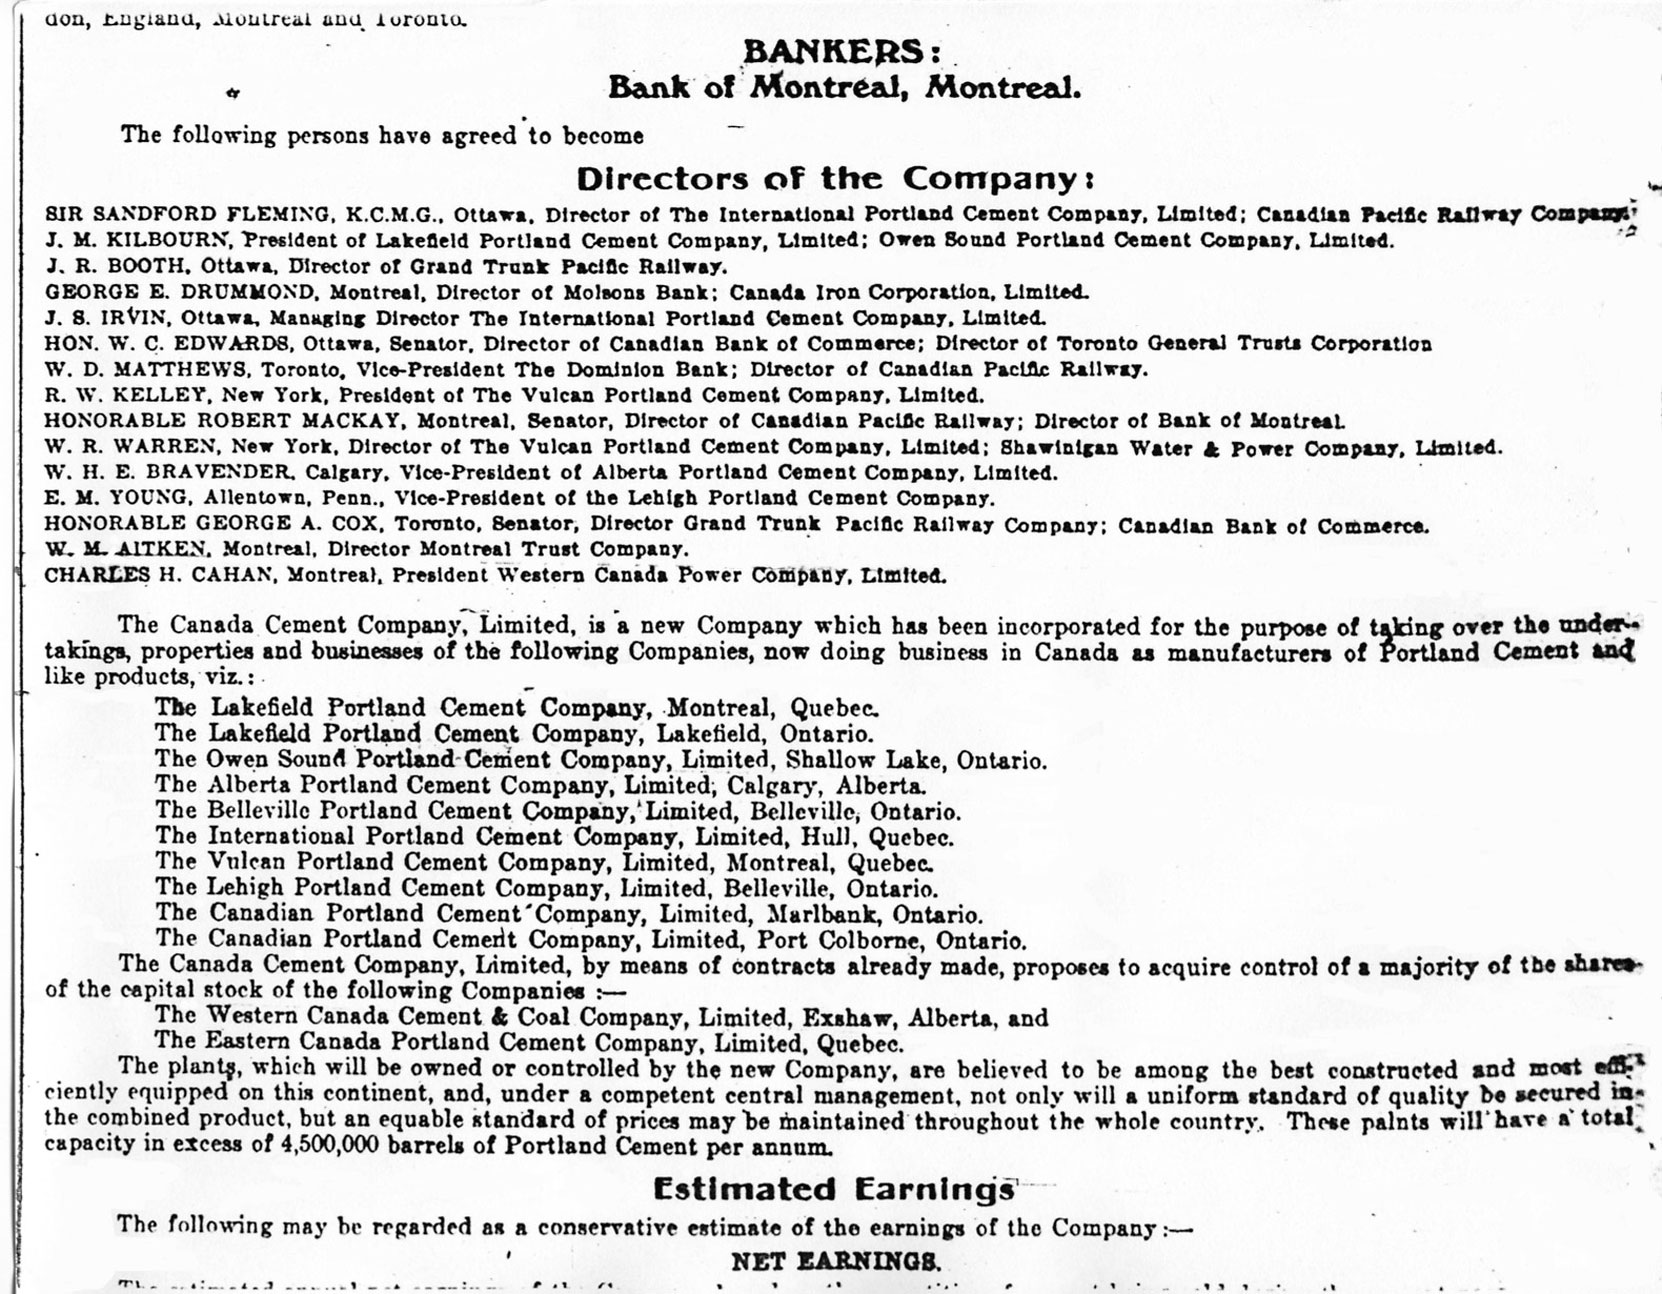 List of Canada Cement Company Directors, taken from a newspaper advertisement, 1909 (Author's collection)